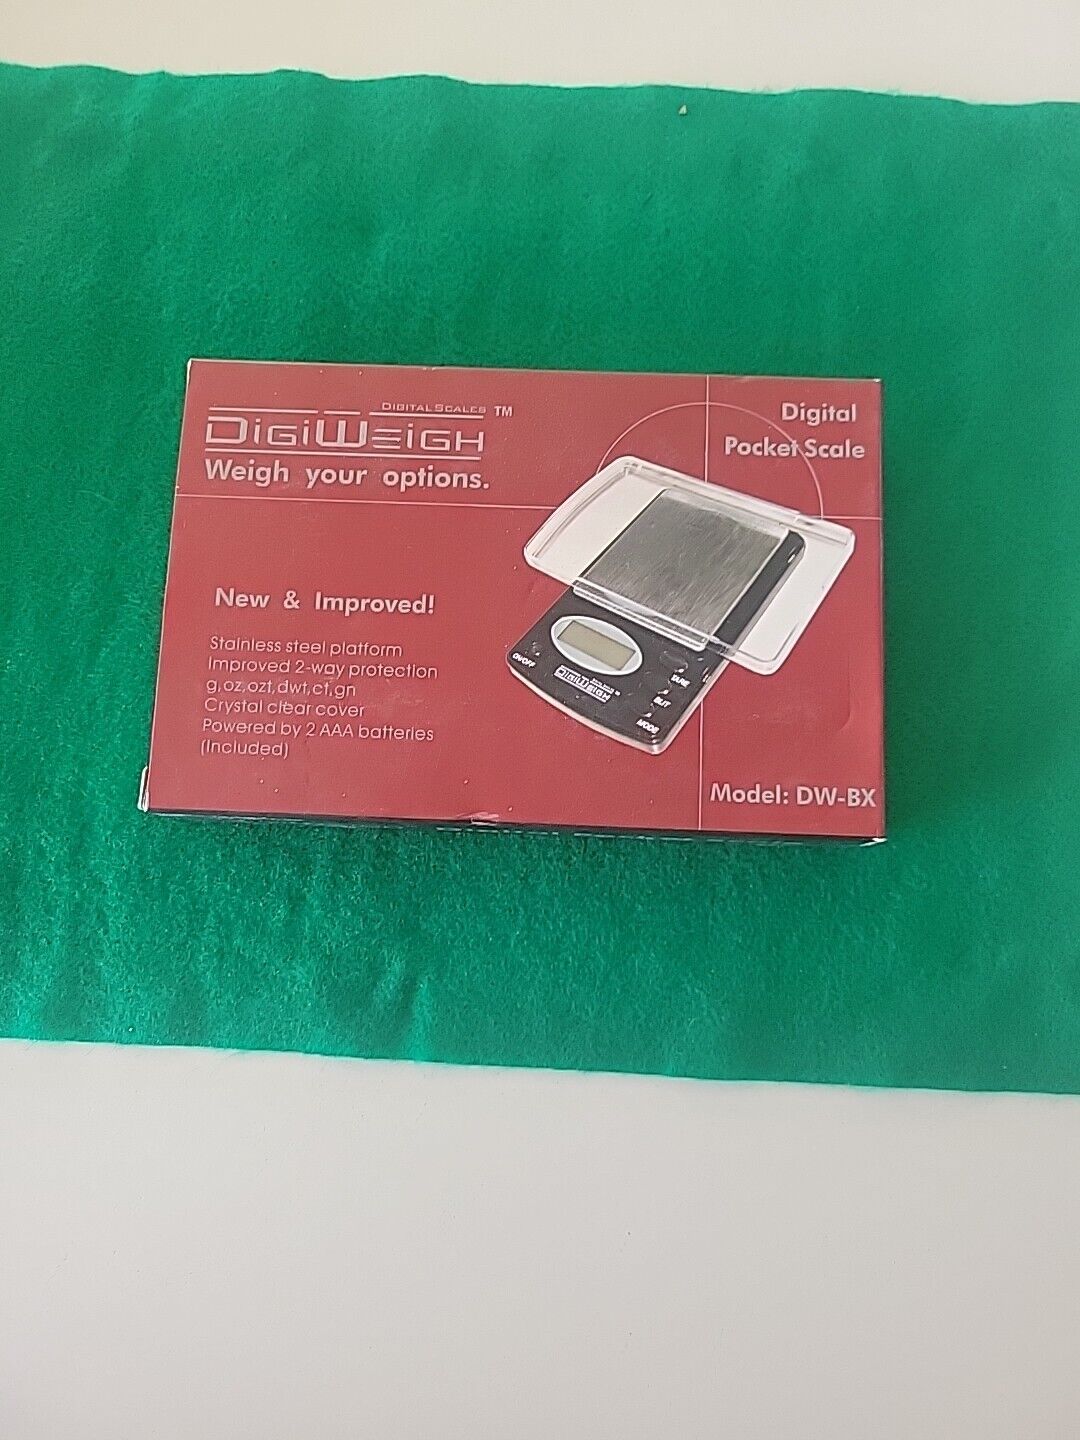 NEW Digital Scales DigiWeigh DW-BX600 Pocket Scale Digital Scales Does Not Apply